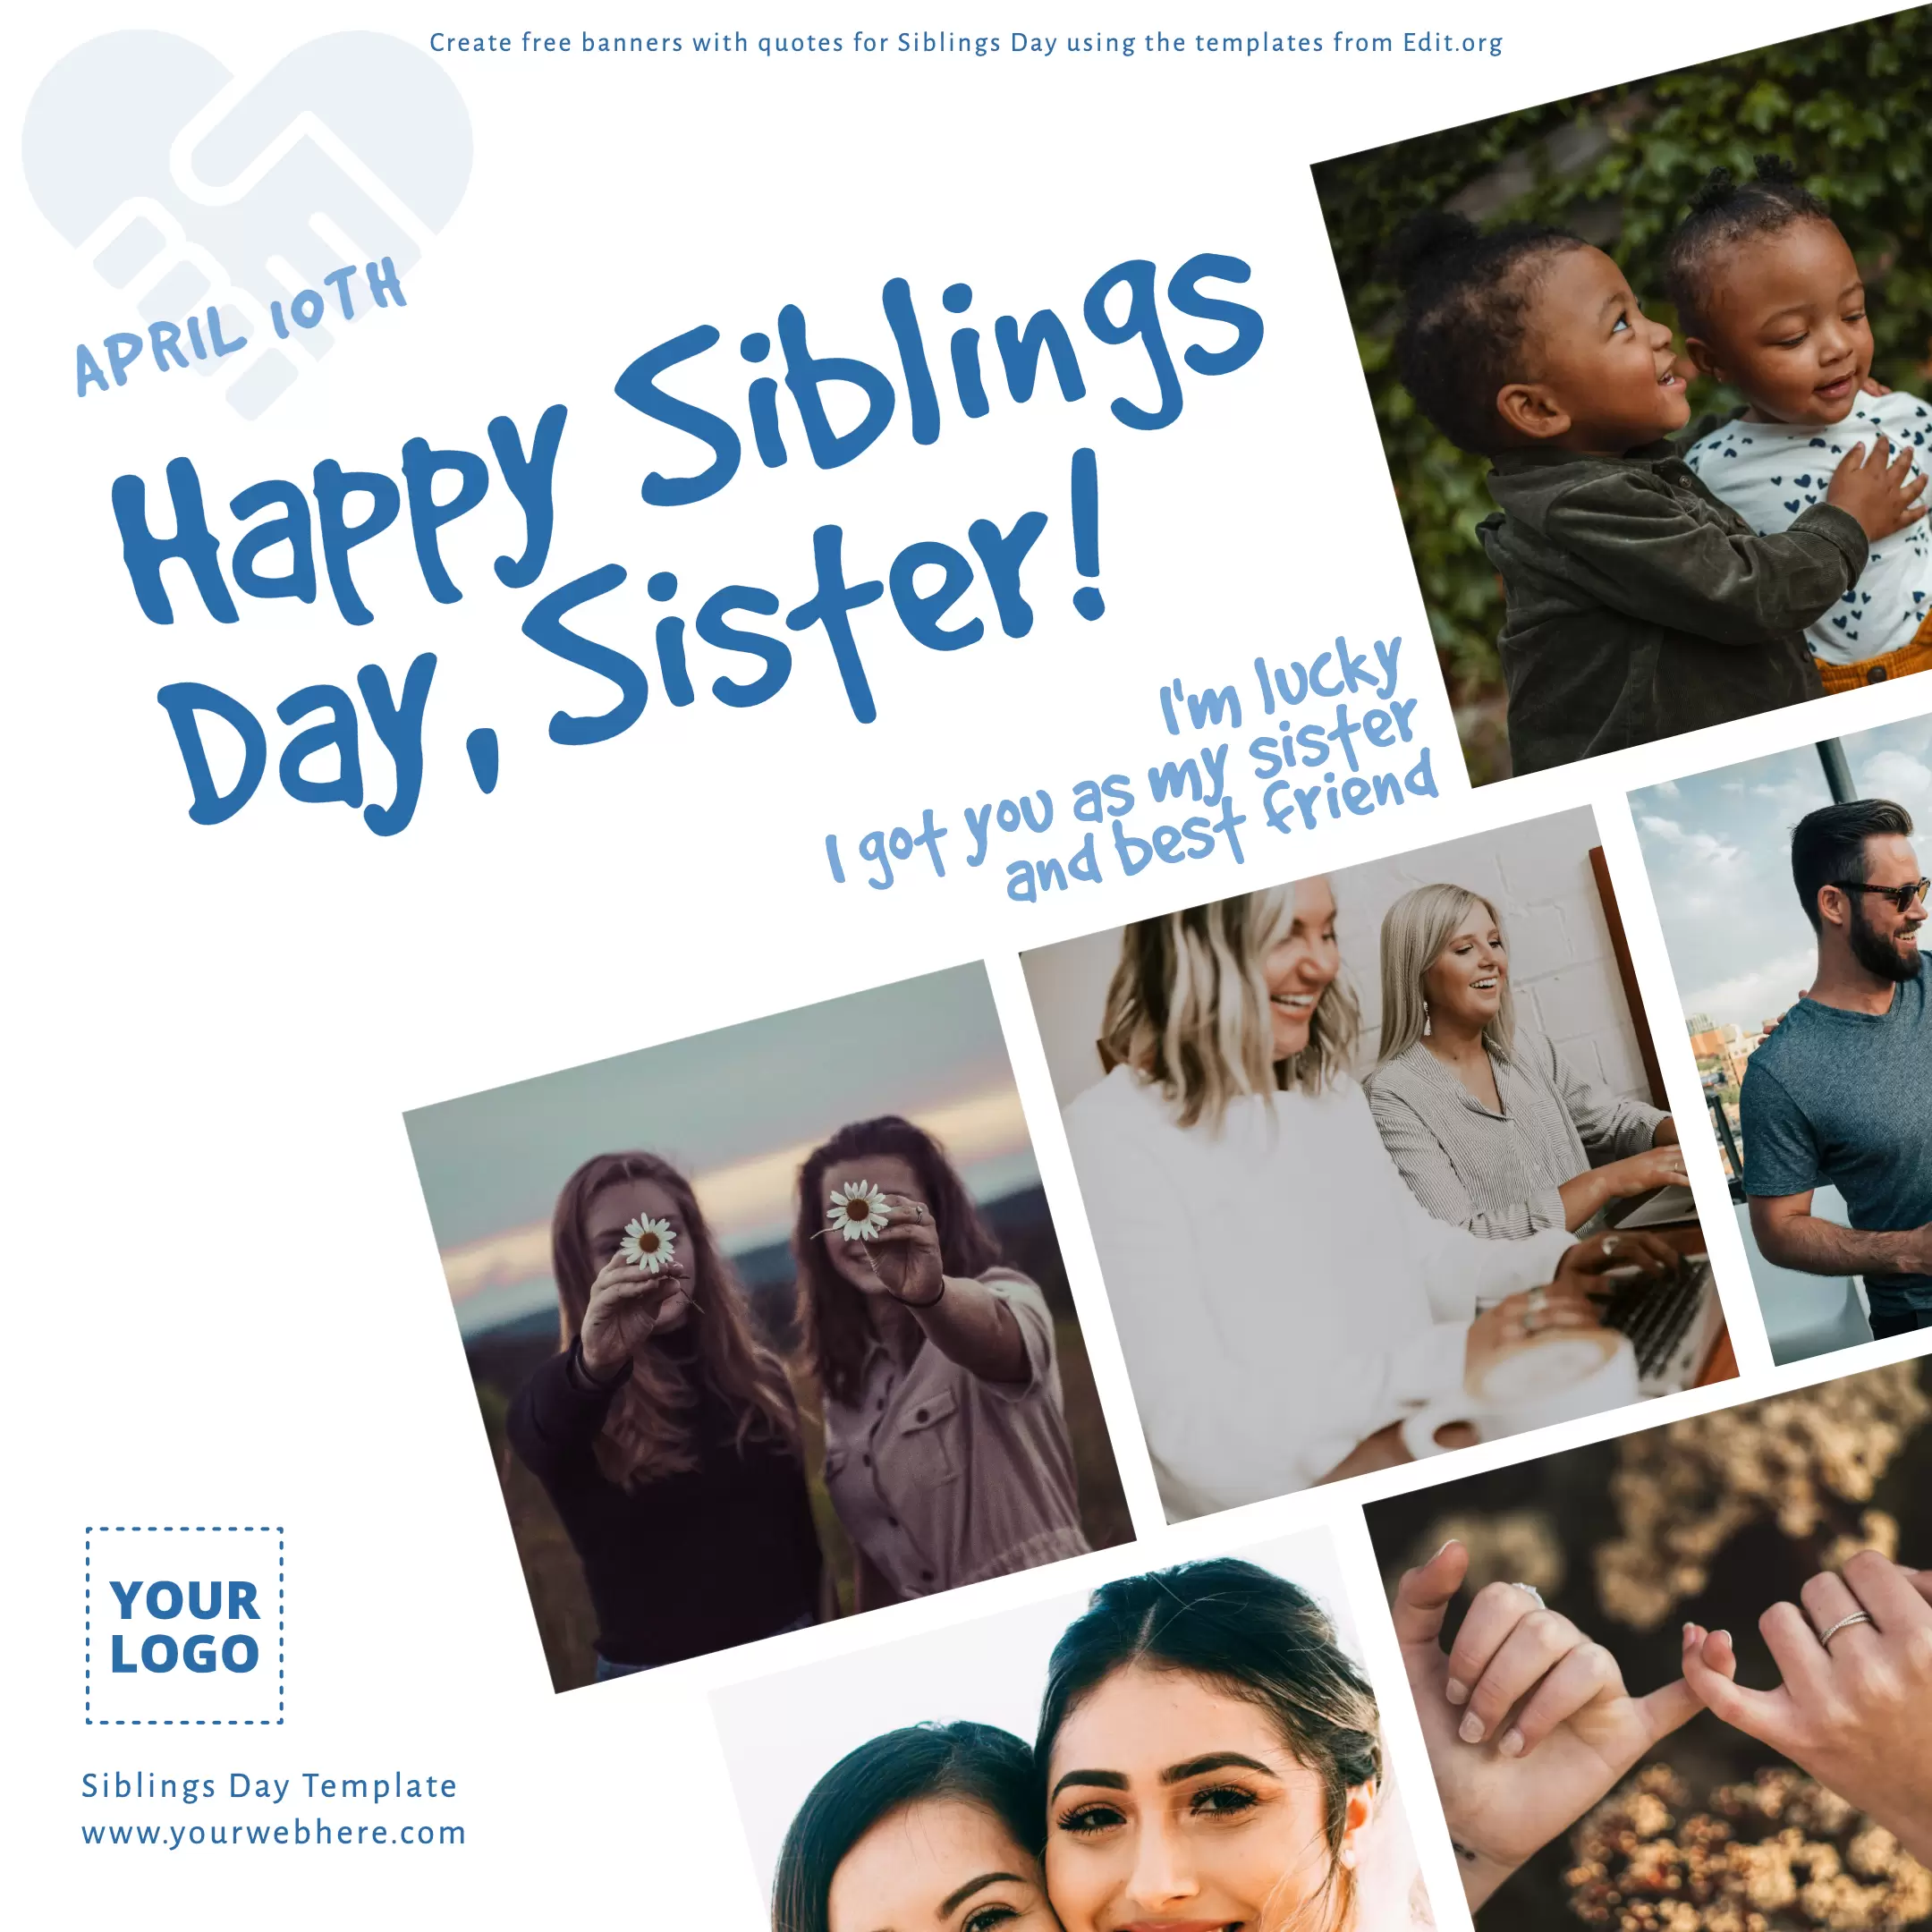 Editable National Sisters Day cards to customize